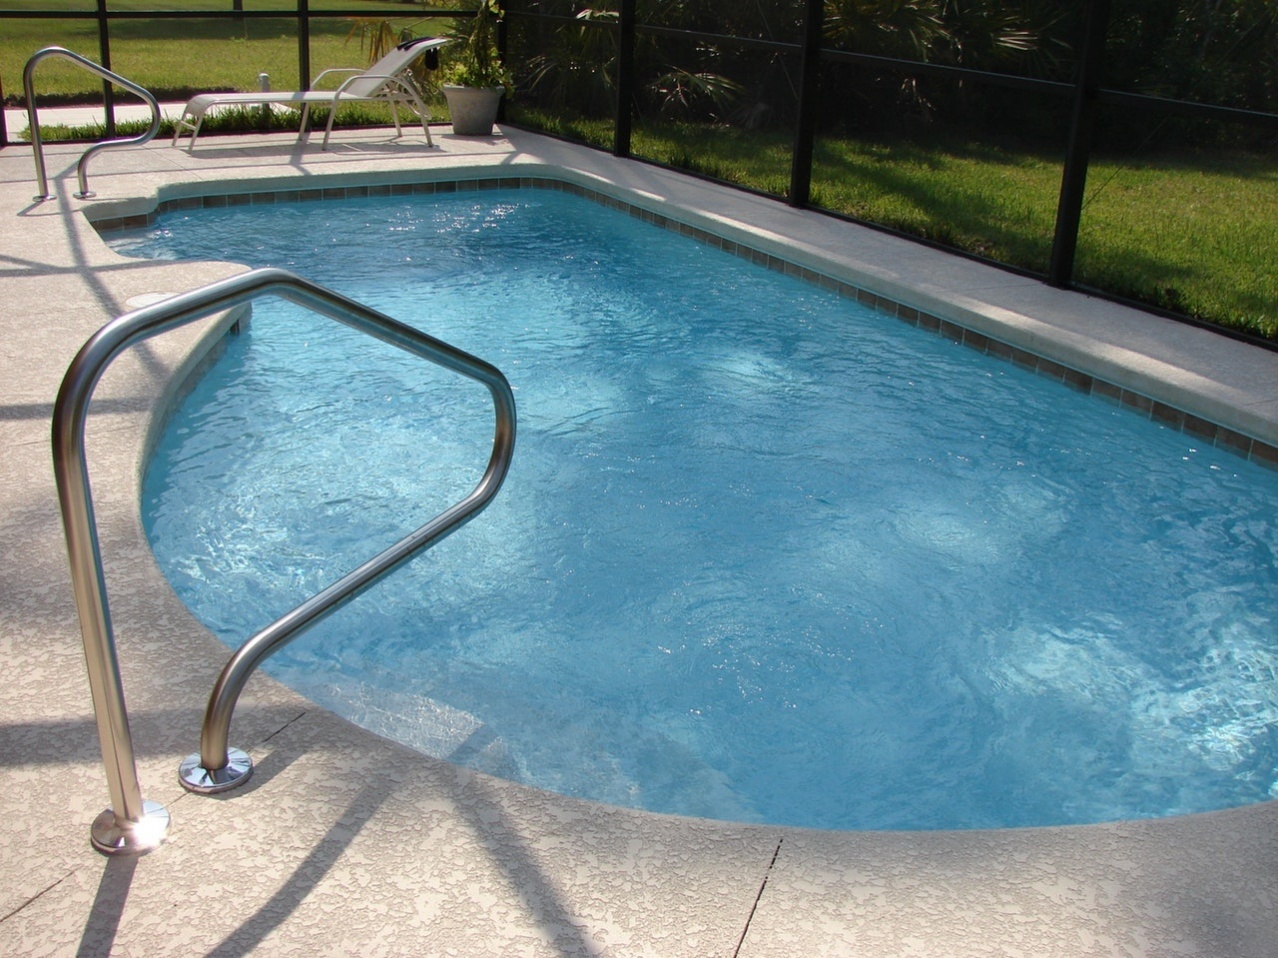 Extending your pool’s life